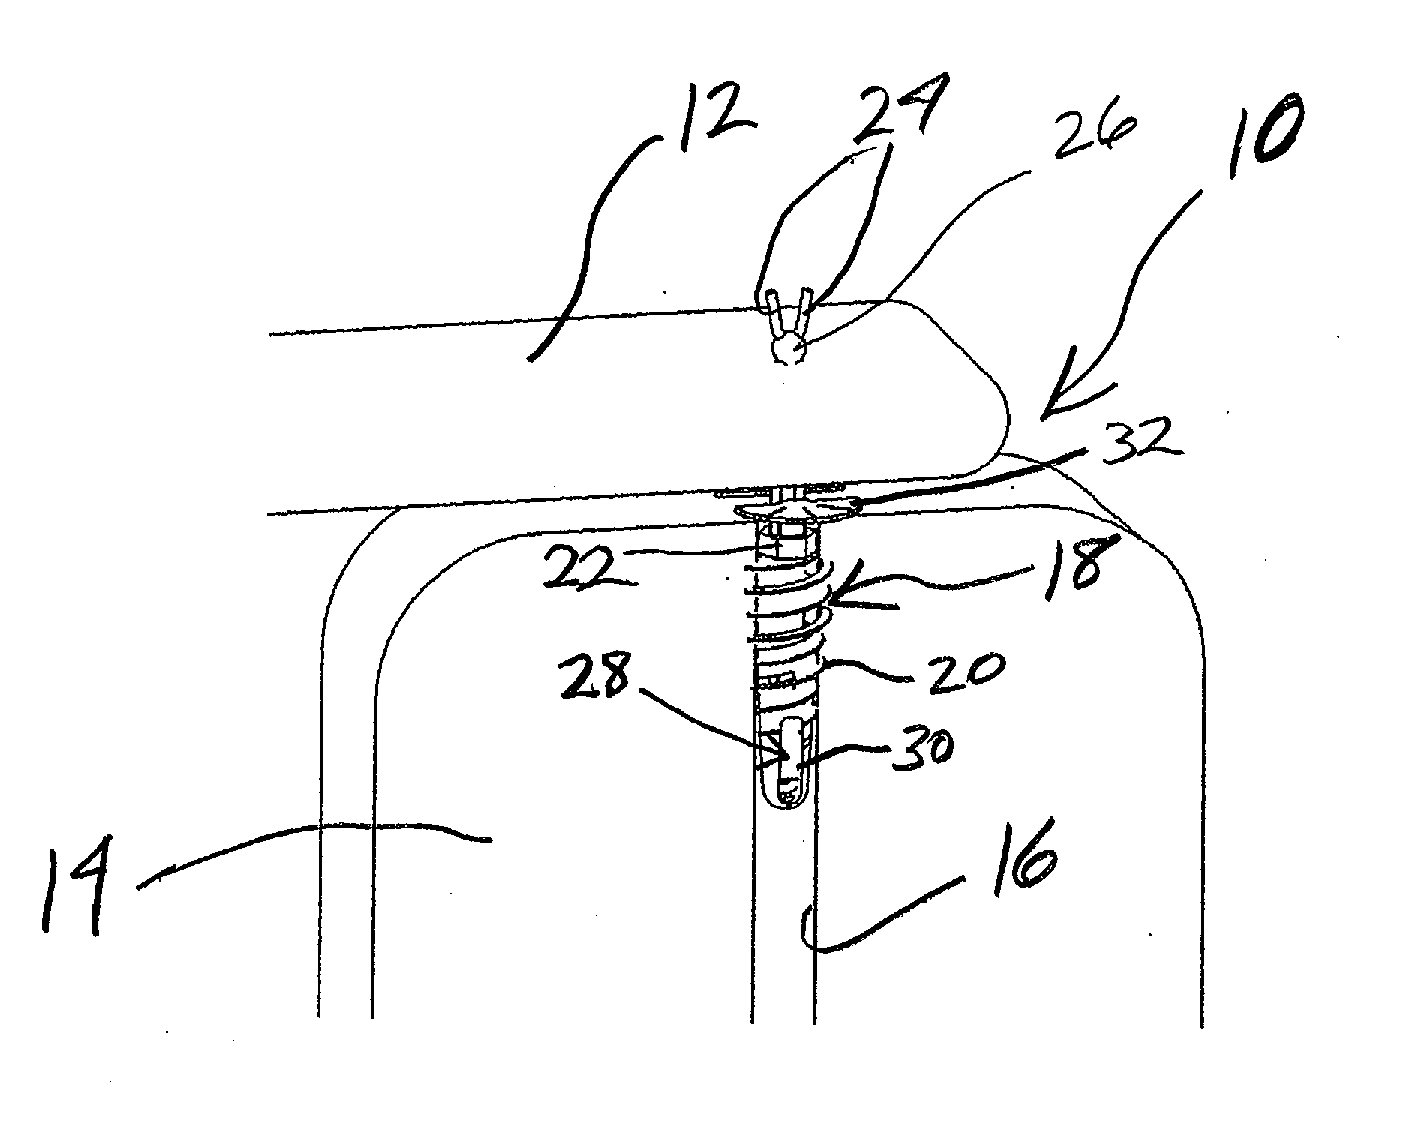 Systems and methods for repairing soft tissues using nanofiber material